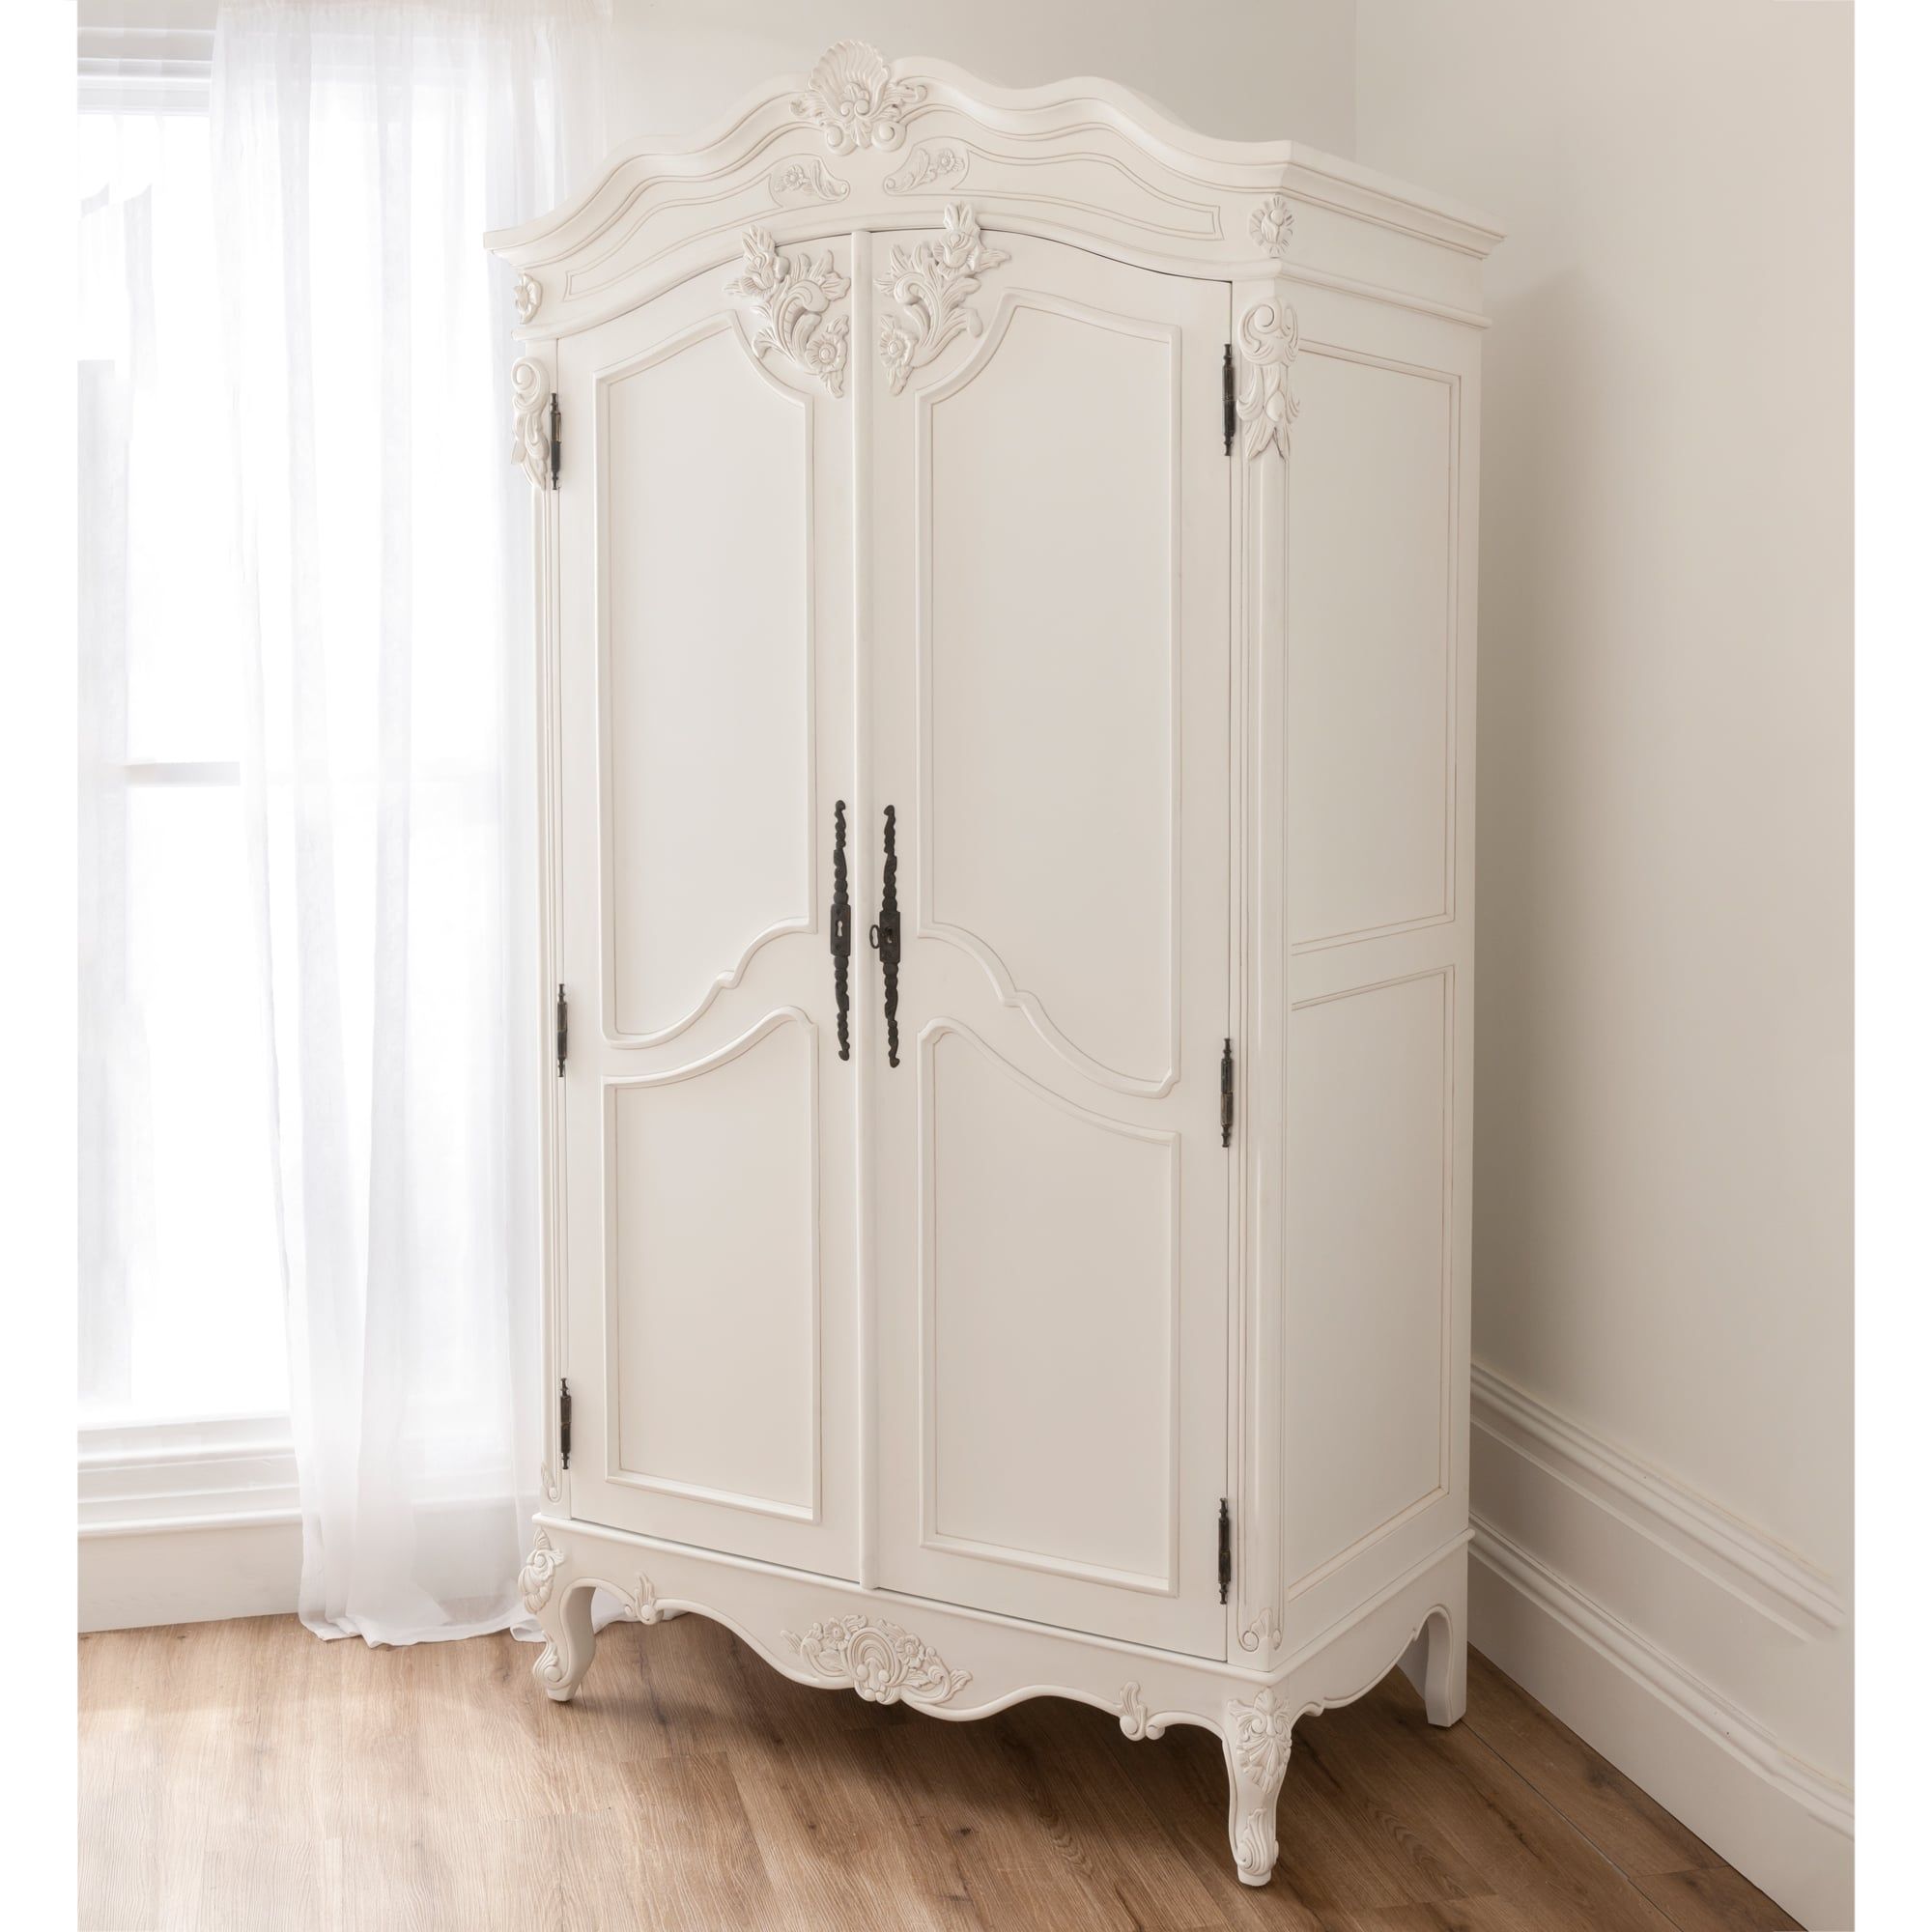 Baroque Antique French Wardrobe Is Available Online At Homesdirect365 Intended For White French Wardrobes (View 3 of 15)